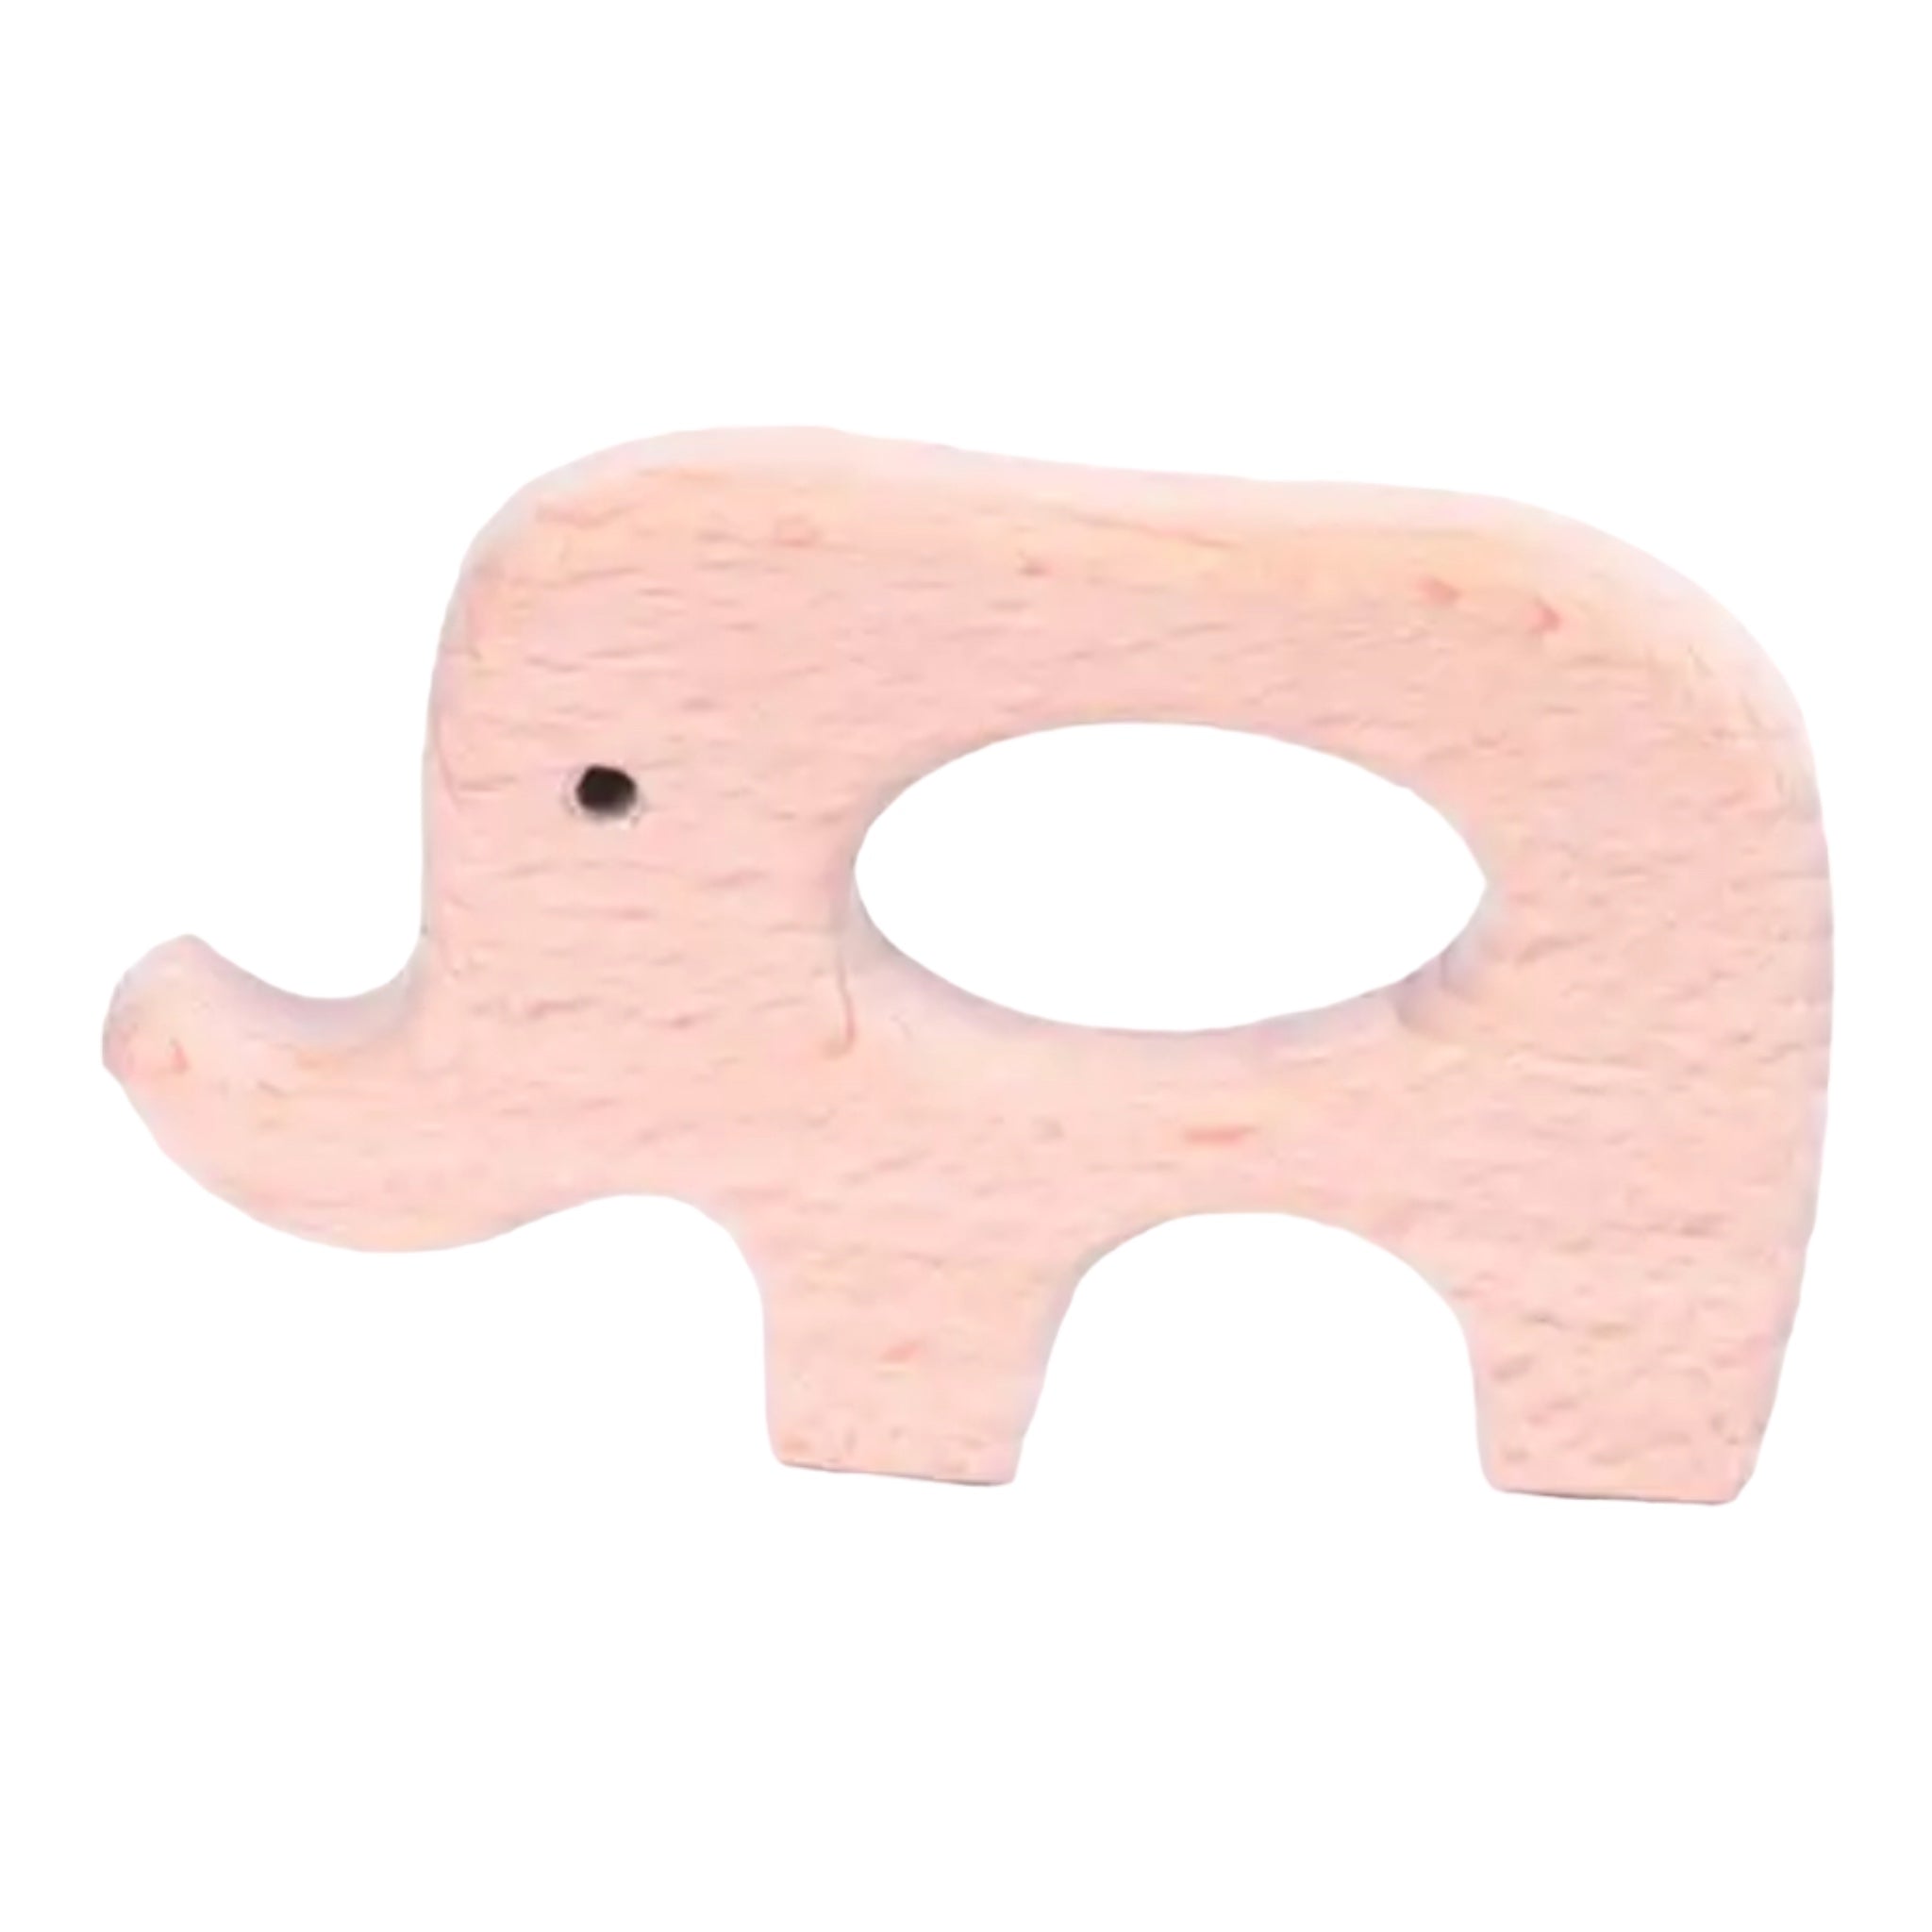 Inna-carton-giftbox-gift-basket-box-dubai-UAE-Elephant-Teether-baby-new-born  820 × 820px  The best baby teethers from Inna Carton Online Gift Store.